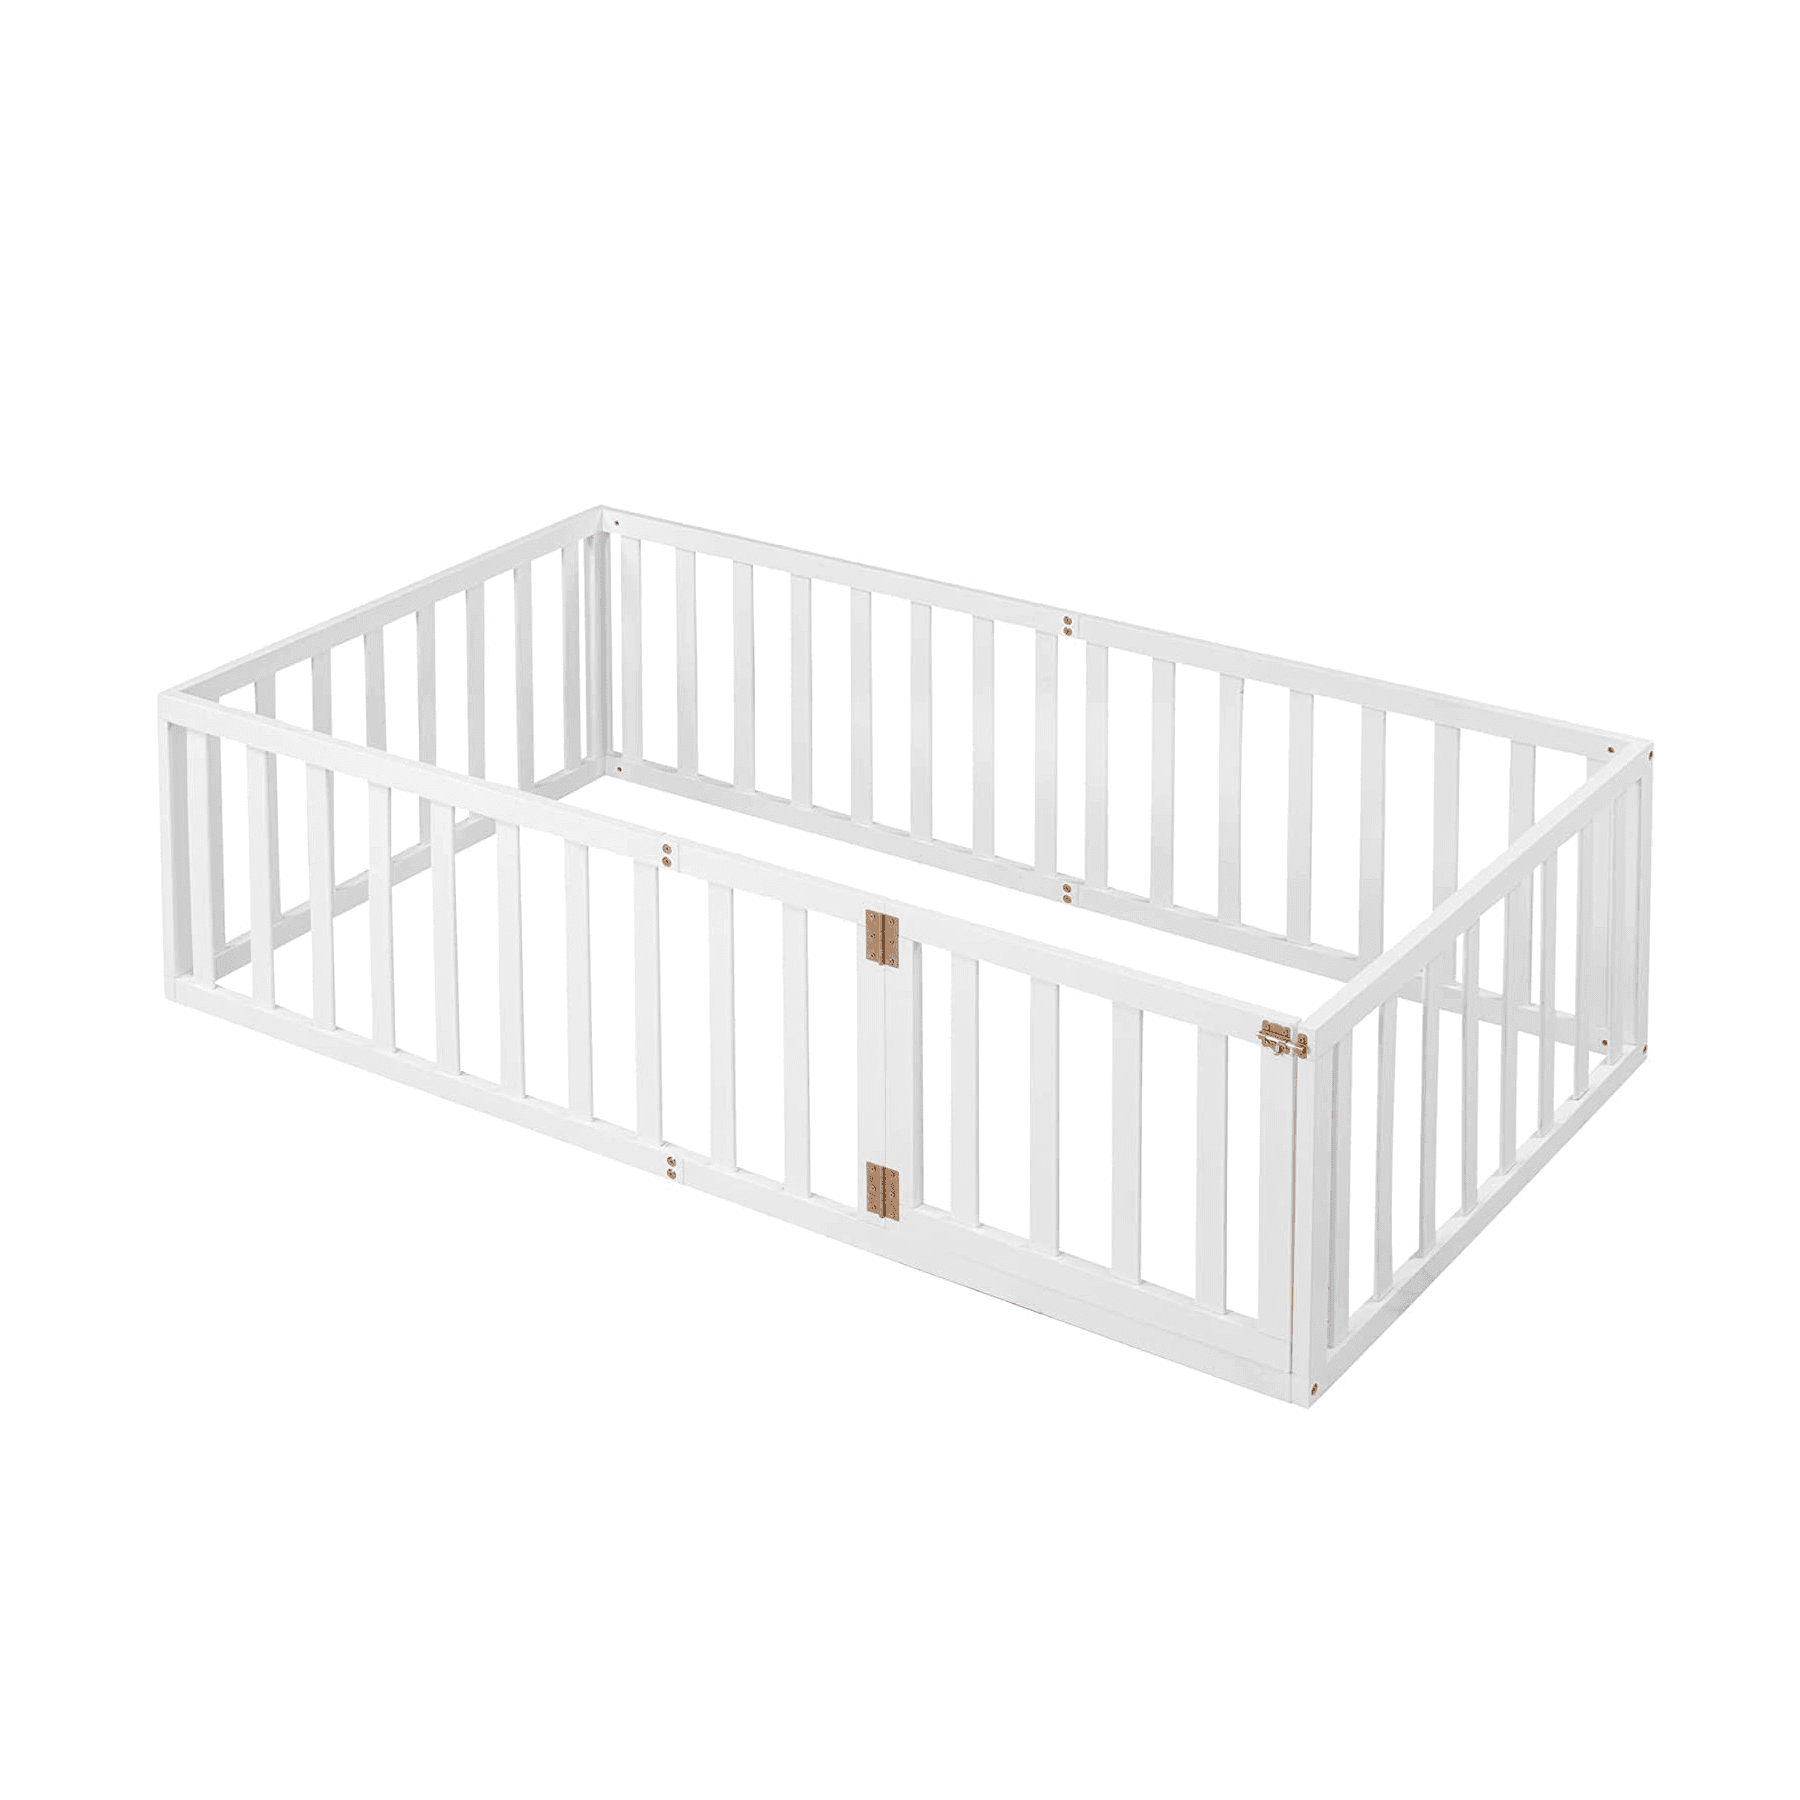 Montessori Harper & Bright Designs Twin Size Floor Bed Frame With Rails and Door White